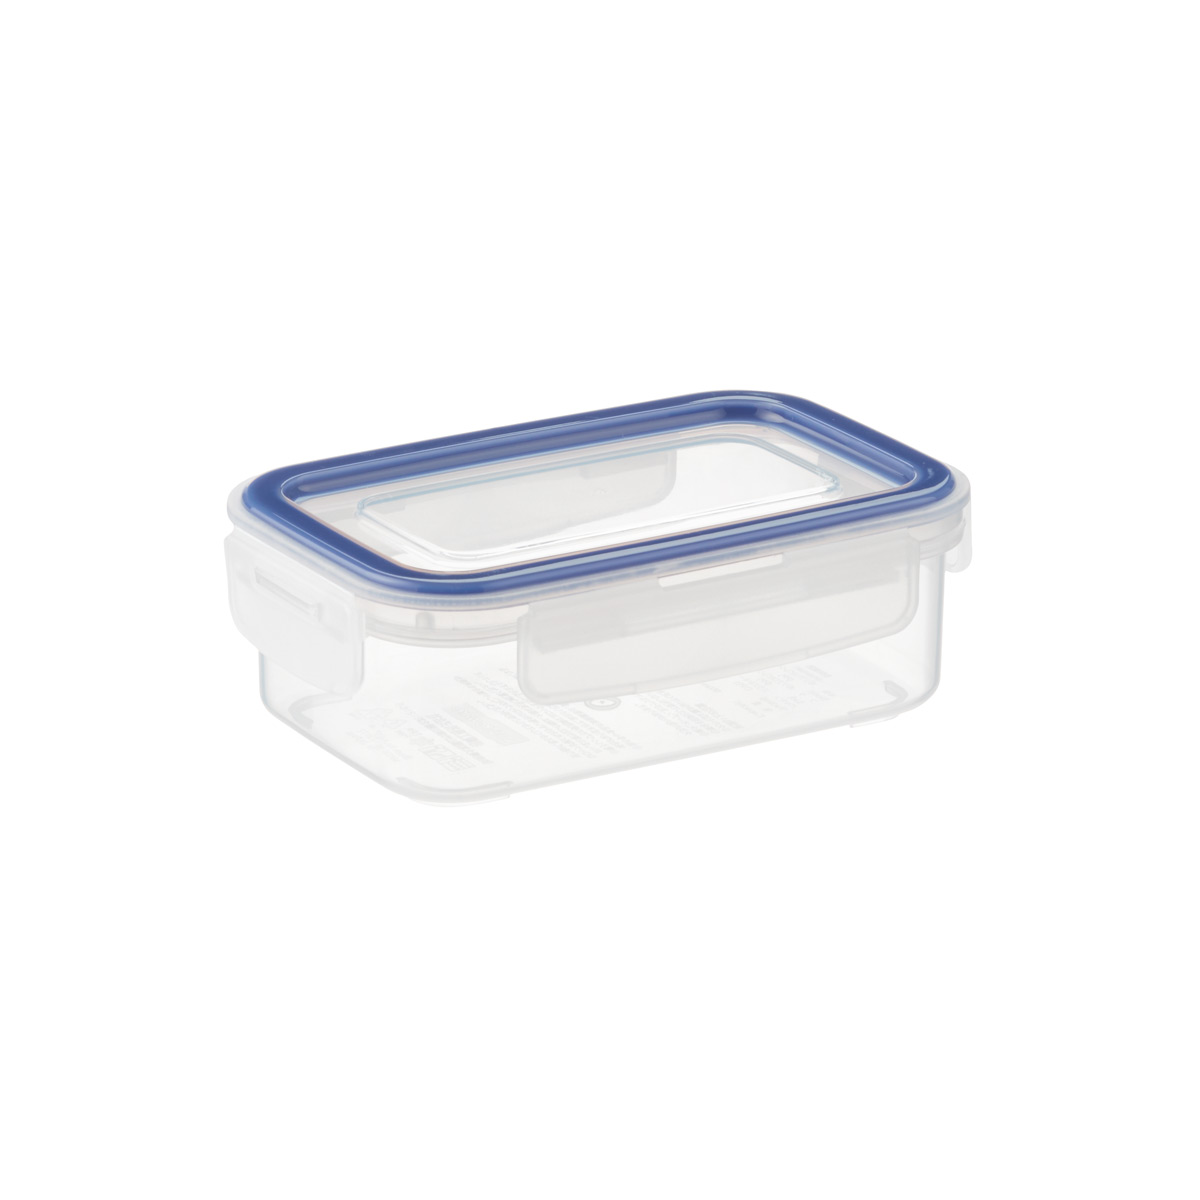 https://www.containerstore.com/catalogimages/303929/10070395-Lustroware-Rectangle-Blue-2.jpg